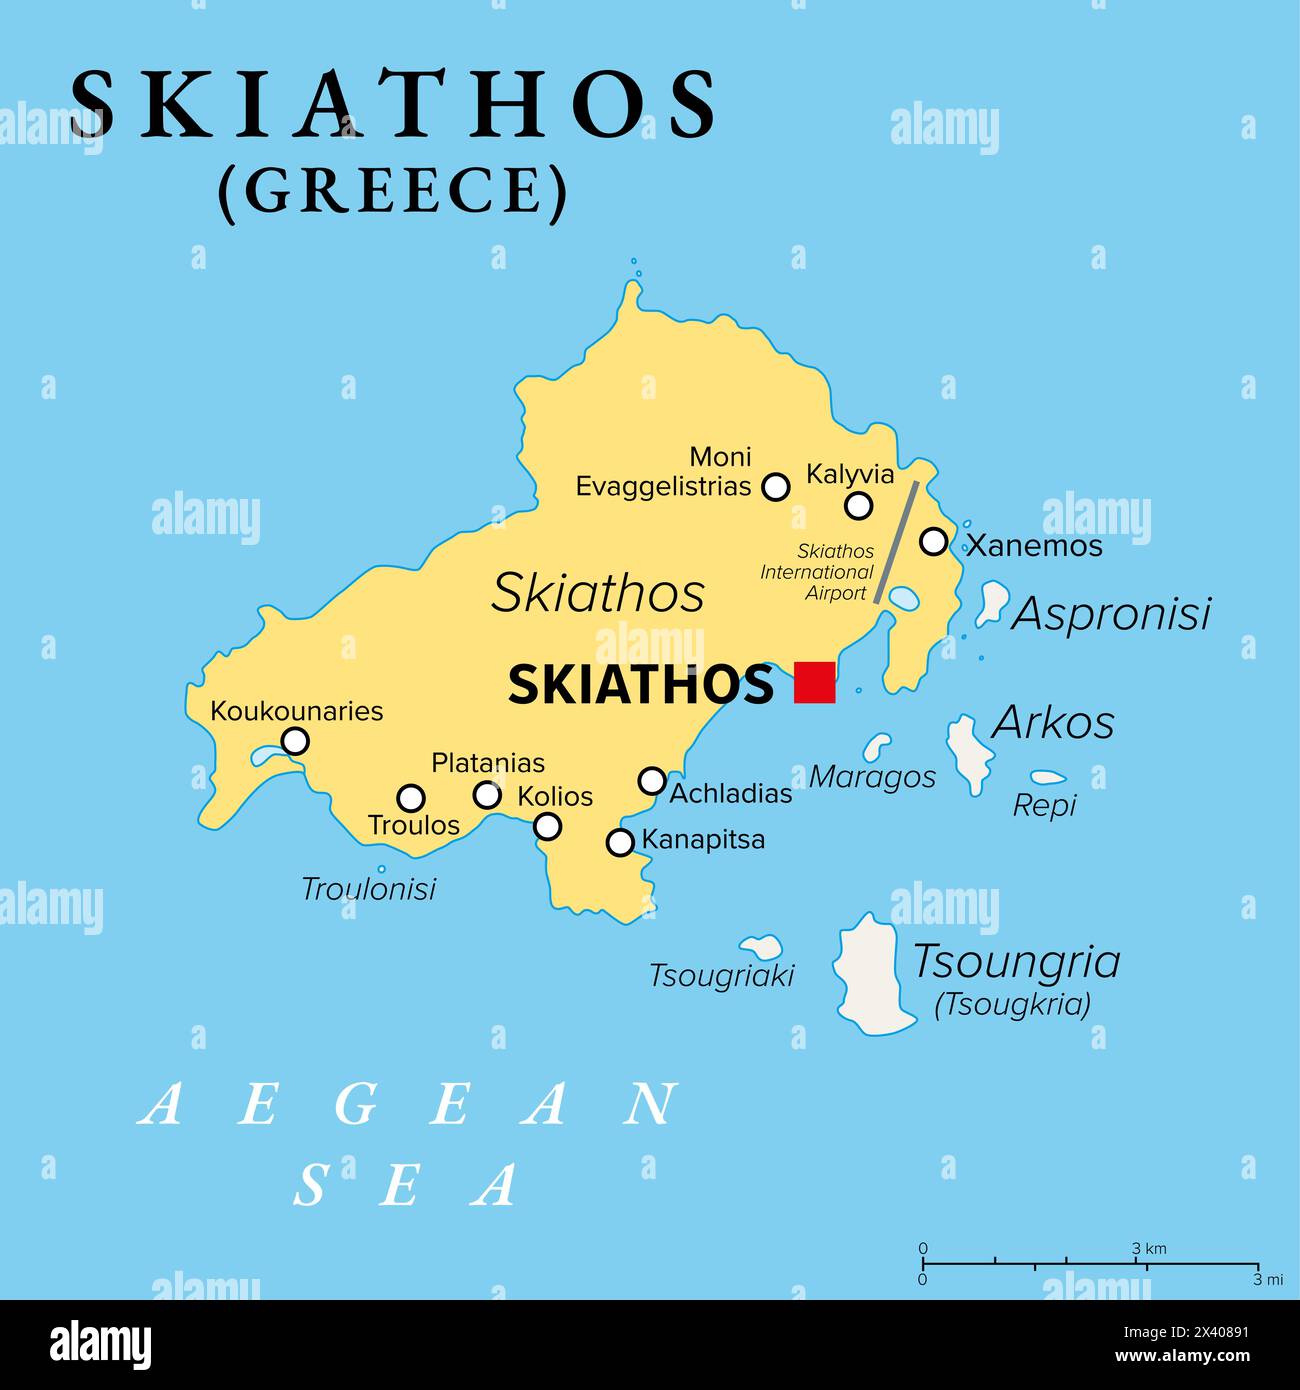 Skiathos, small Greek island, political map. Island in the Aegean Sea, part of the Sporades, with the main town Skiathos, and with neighboring islets. Stock Photo